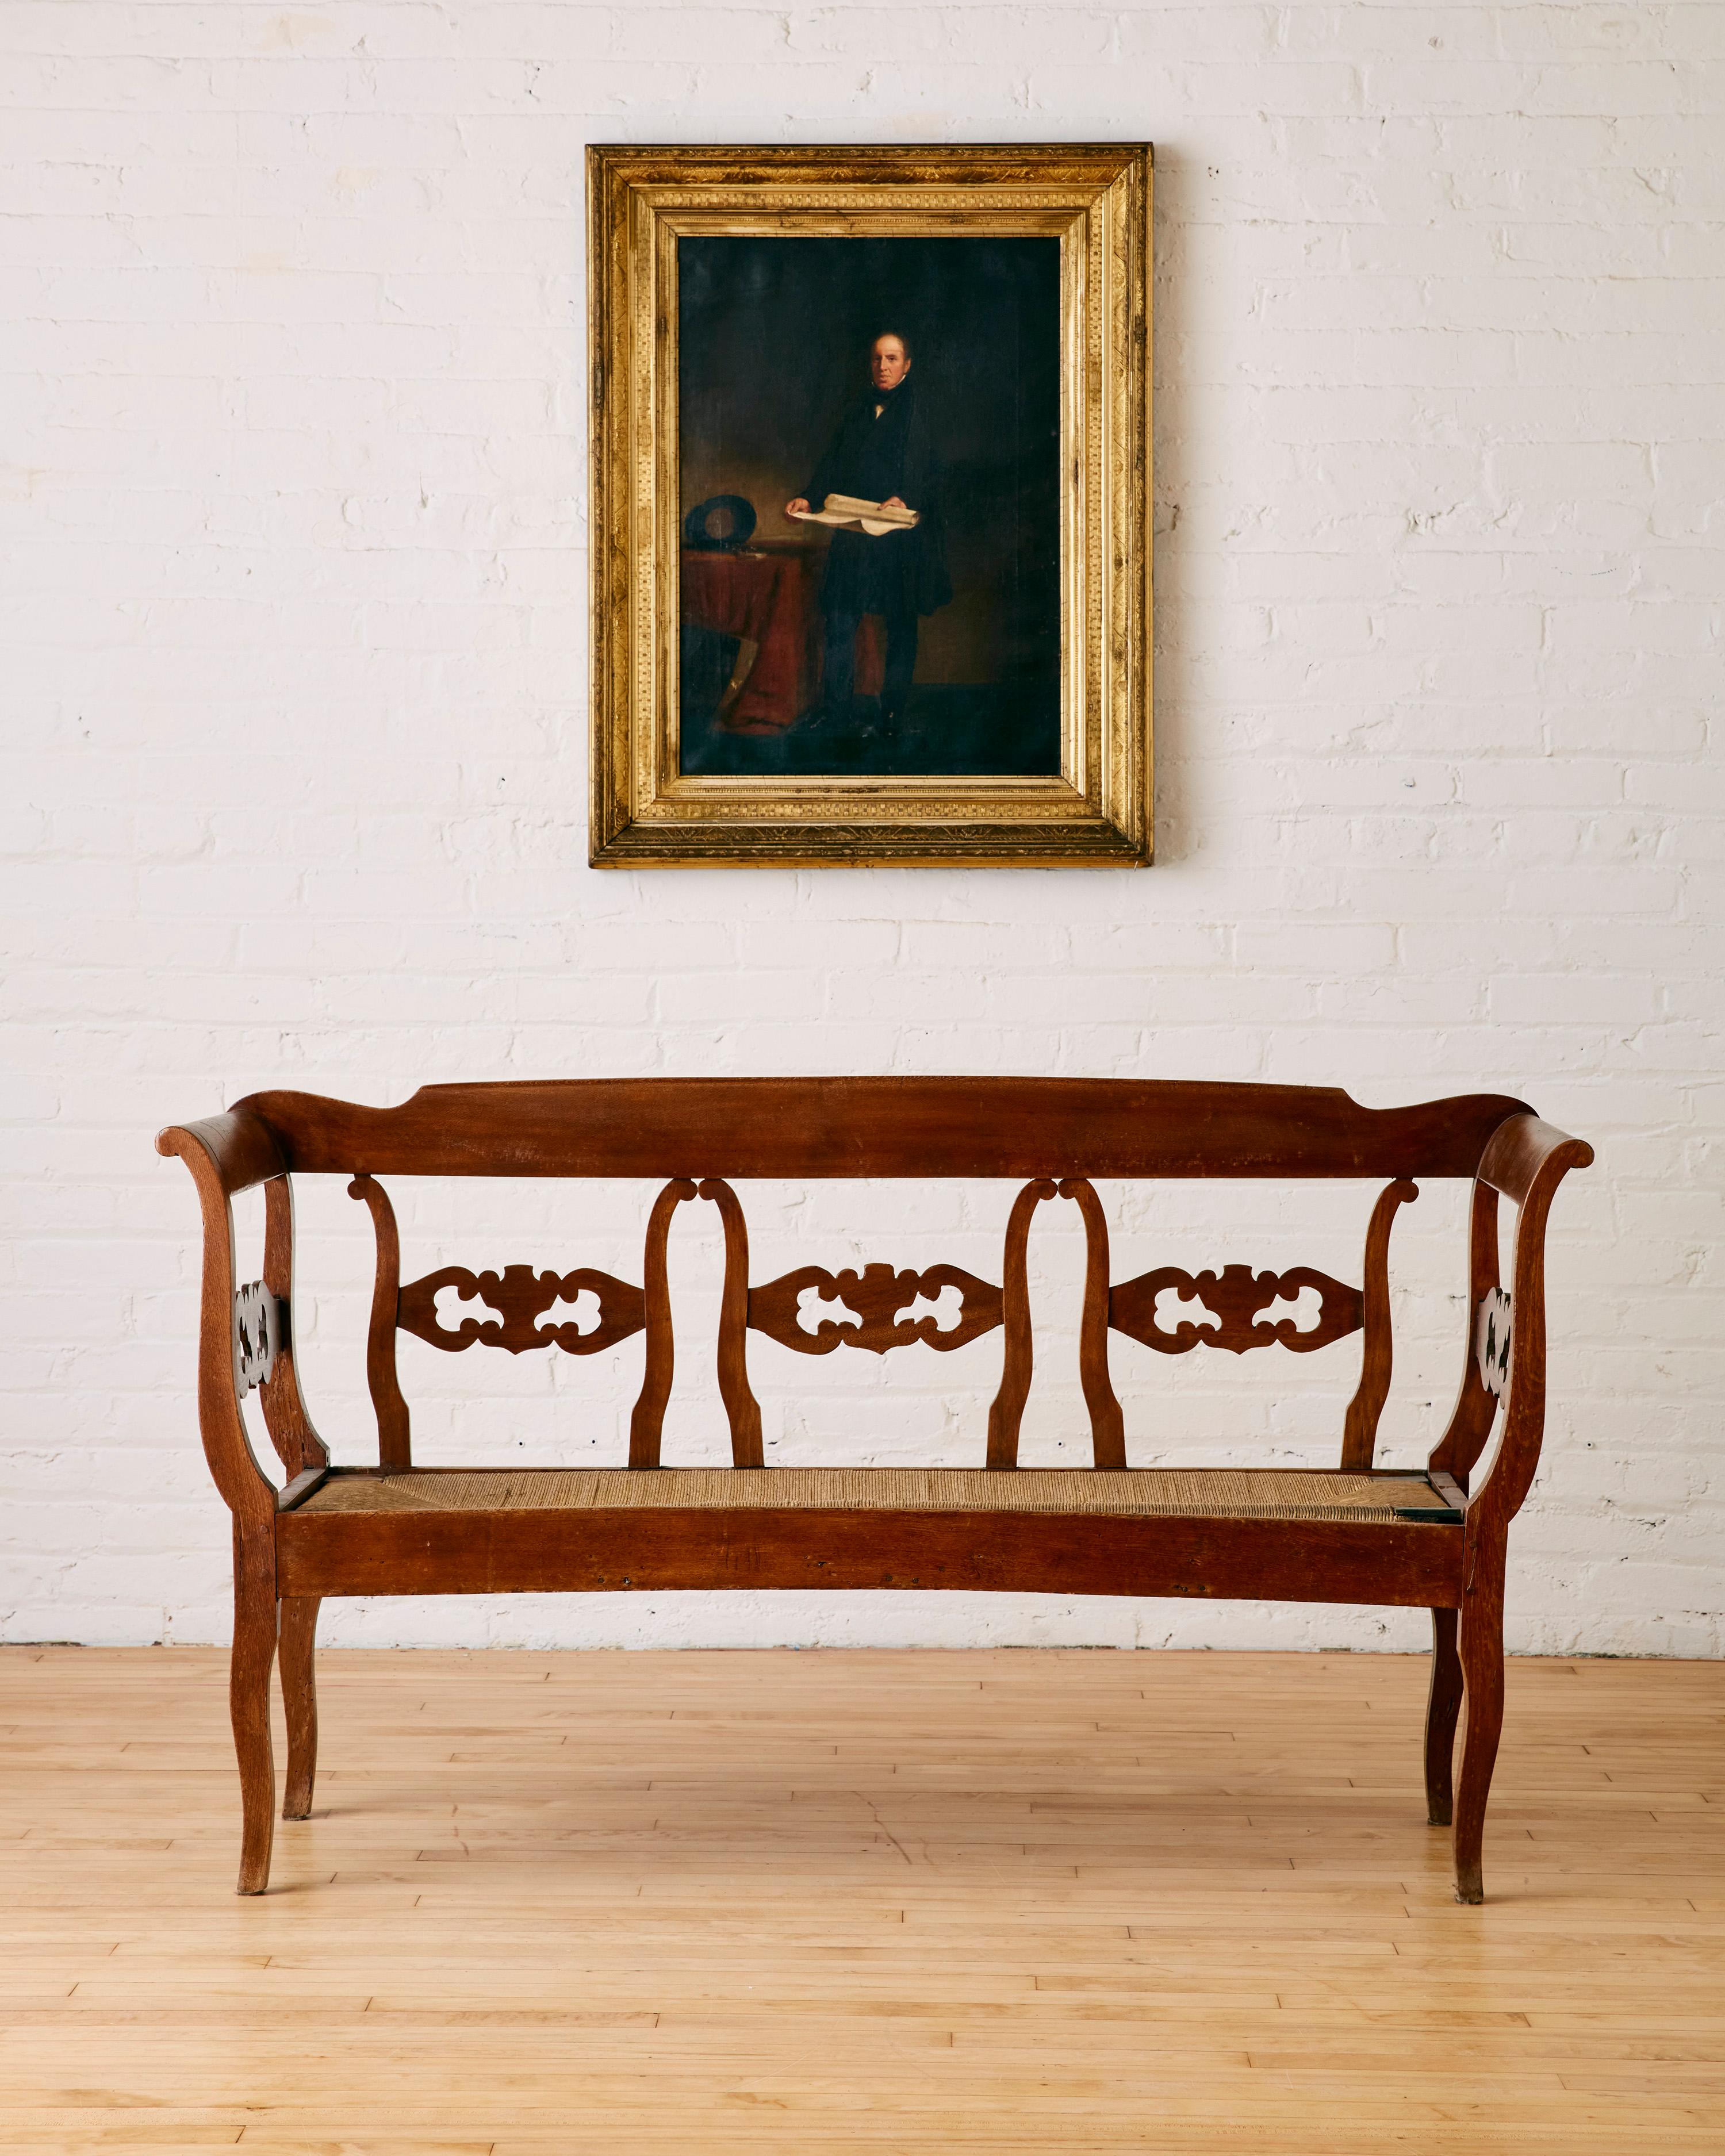 Antique Biedermeier Settee with Rush Seating and Carved Backrest.

Dimensions: 31.75